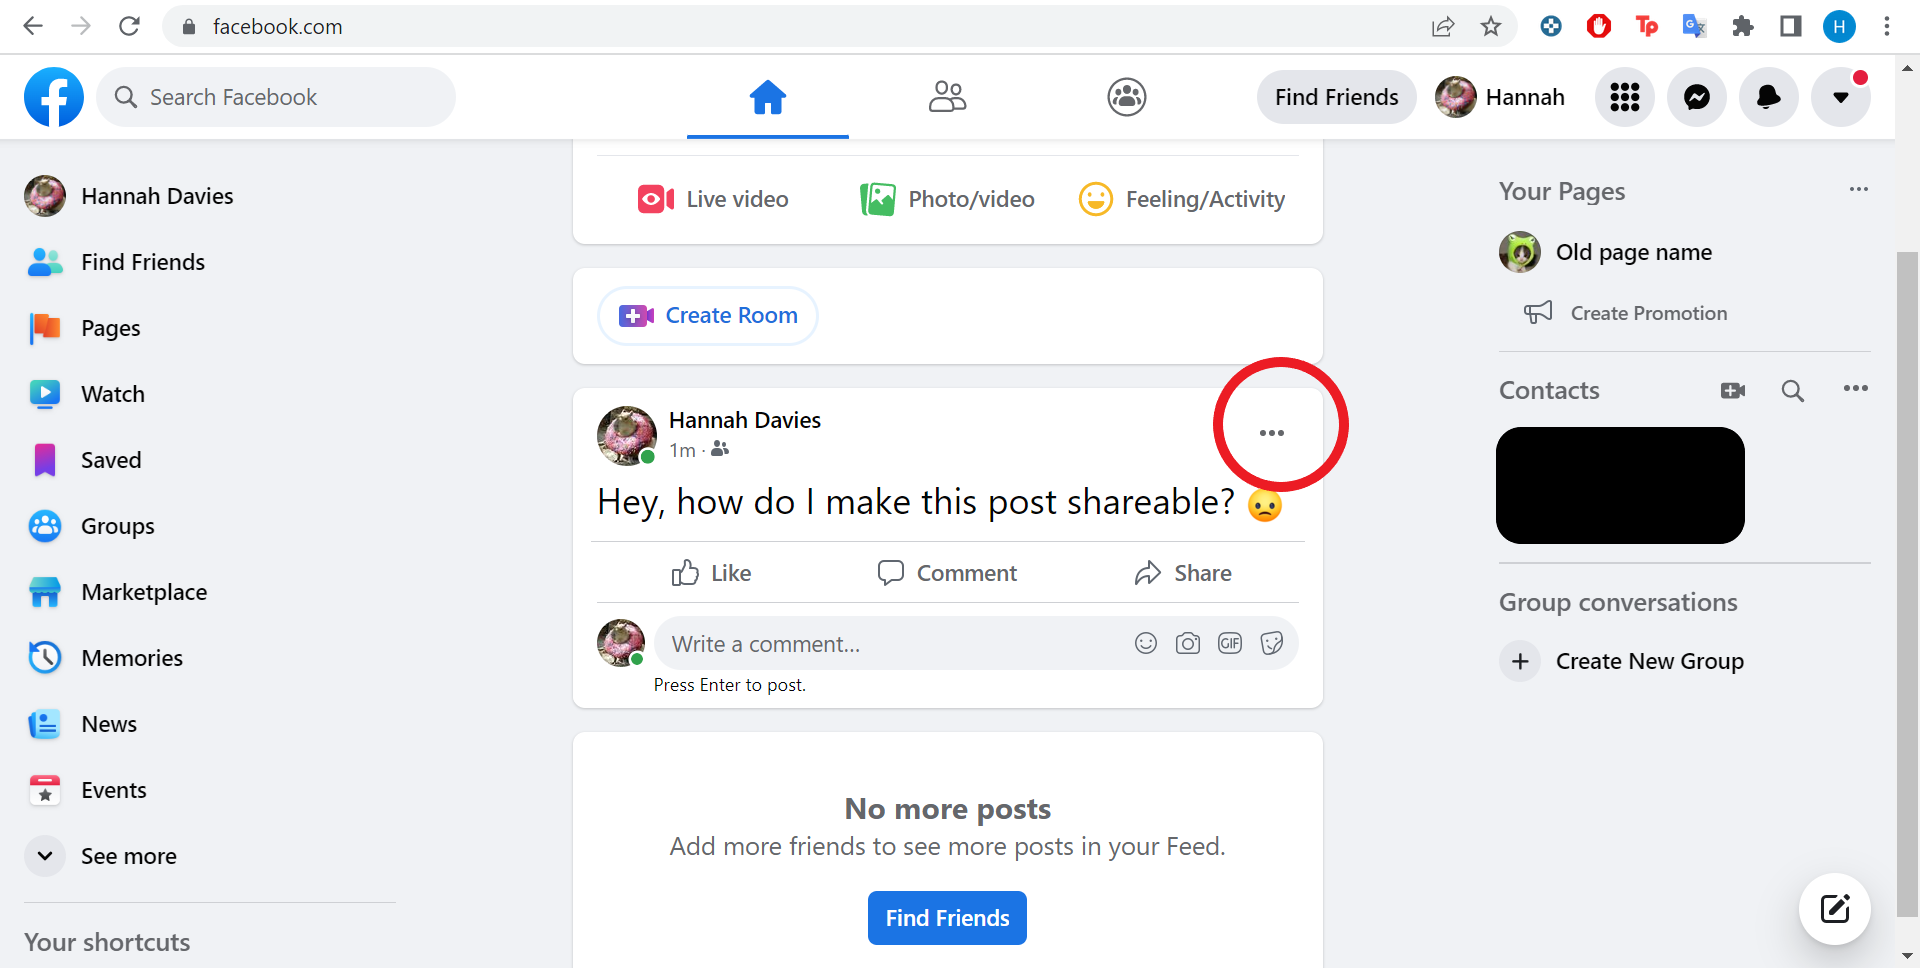 Learn How To Make A Facebook Post Shareable And Grow Your Reach